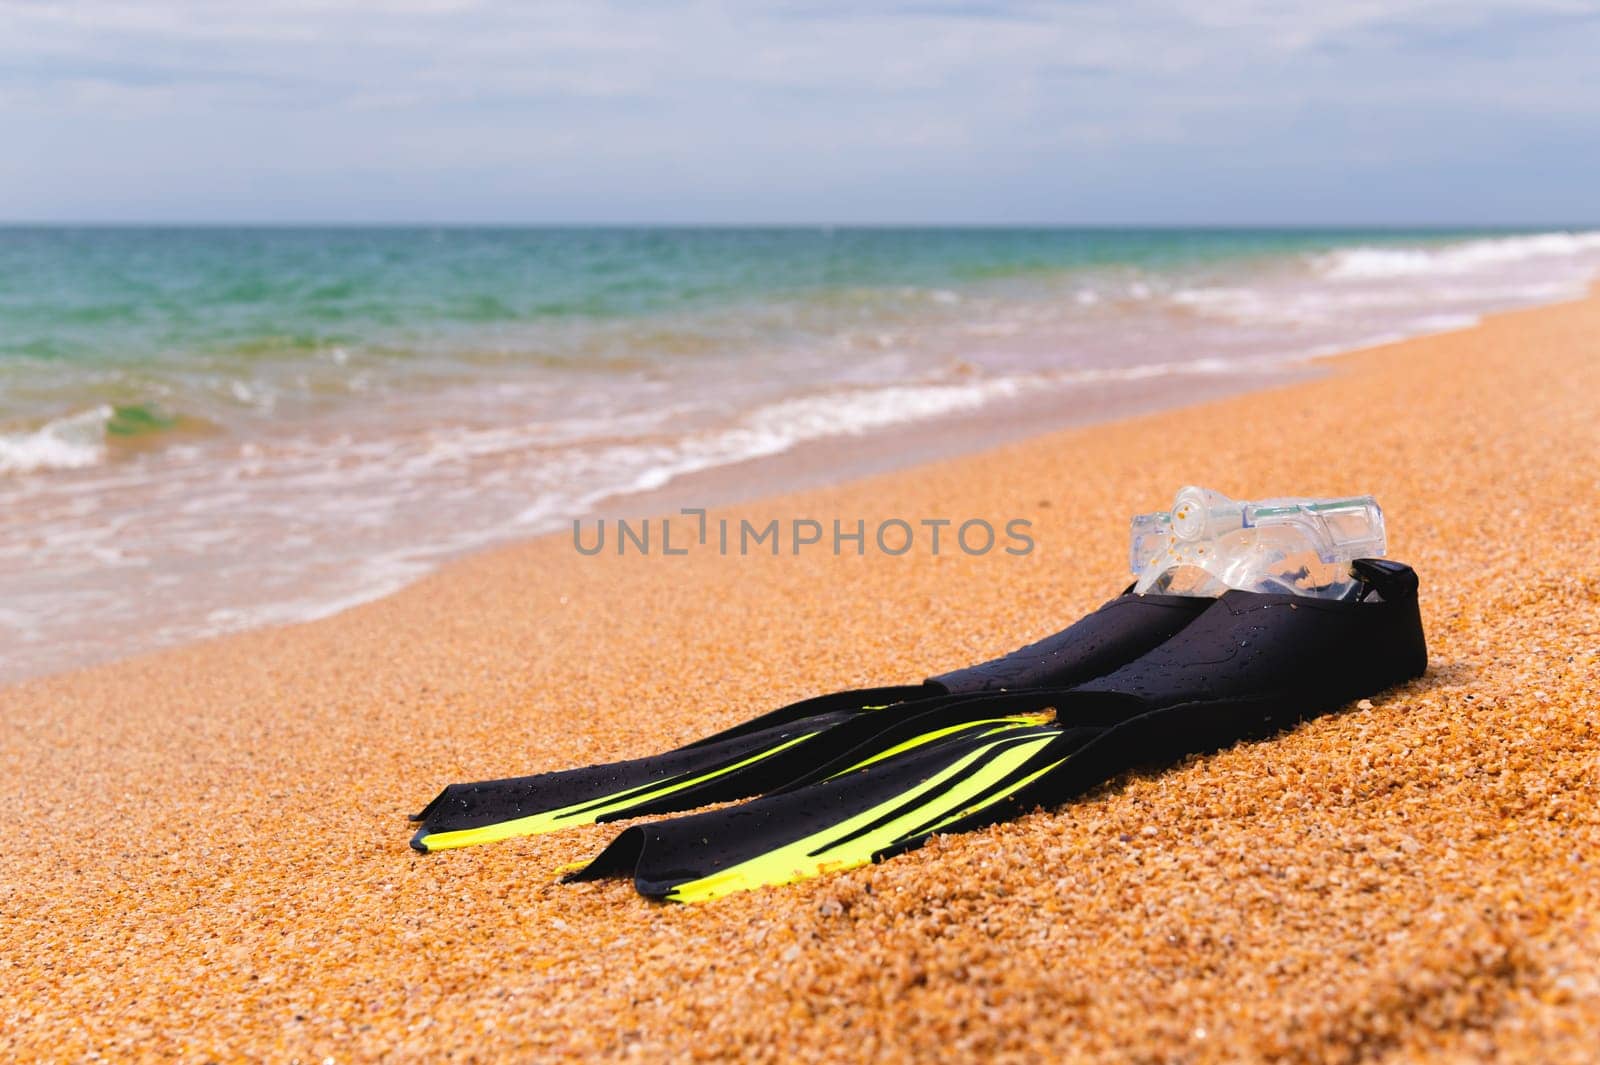 A snorkeling mask with fins lies on a sandy beach overlooking the sea and sky, no people